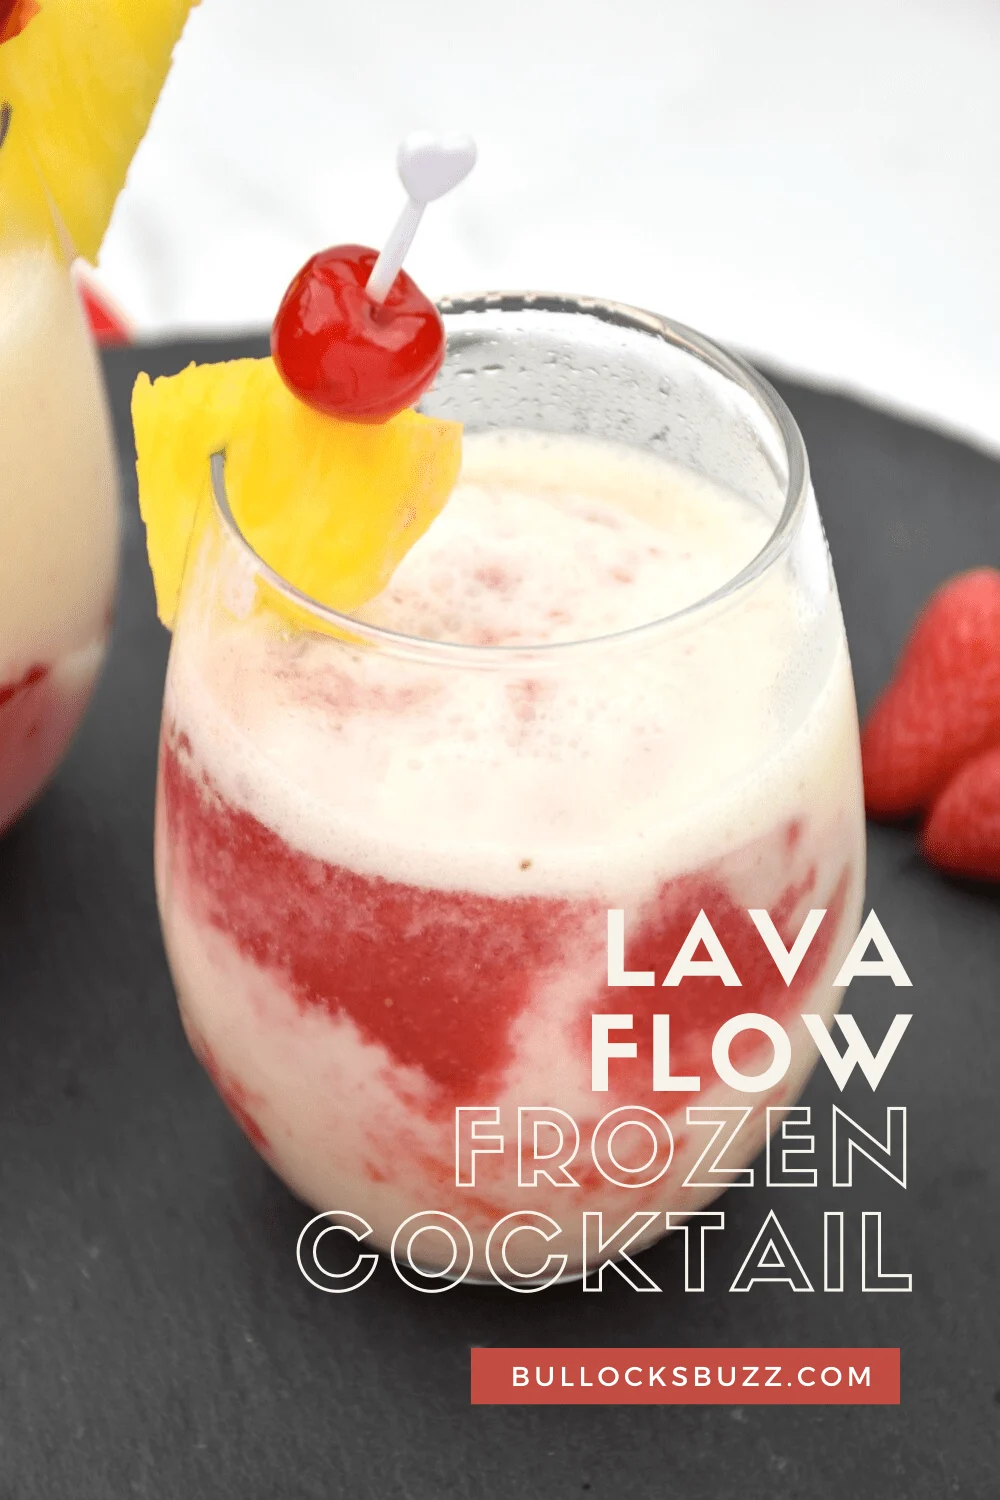 close up image of lava flow cocktail in a glass